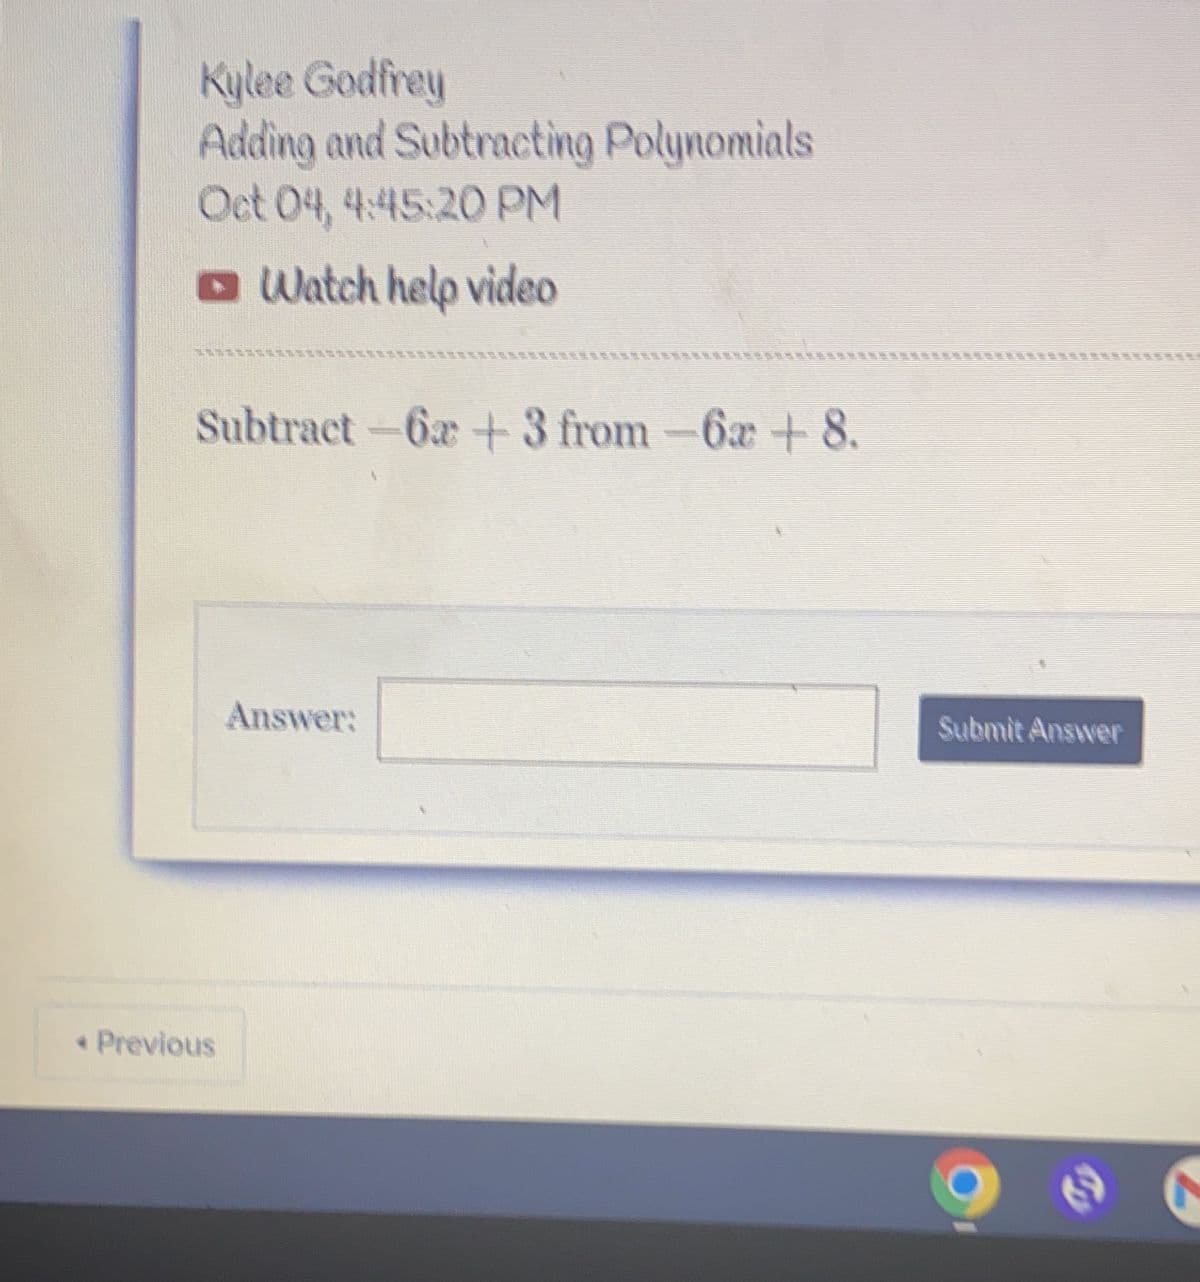 Kylee Godfrey
Adding and Subtracting Polynomials
Oct 04, 4:45:20 PM
Watch help video
Subtract-62 +3 from-6a+ 8.
< Previous
Answer:
Submit Answer